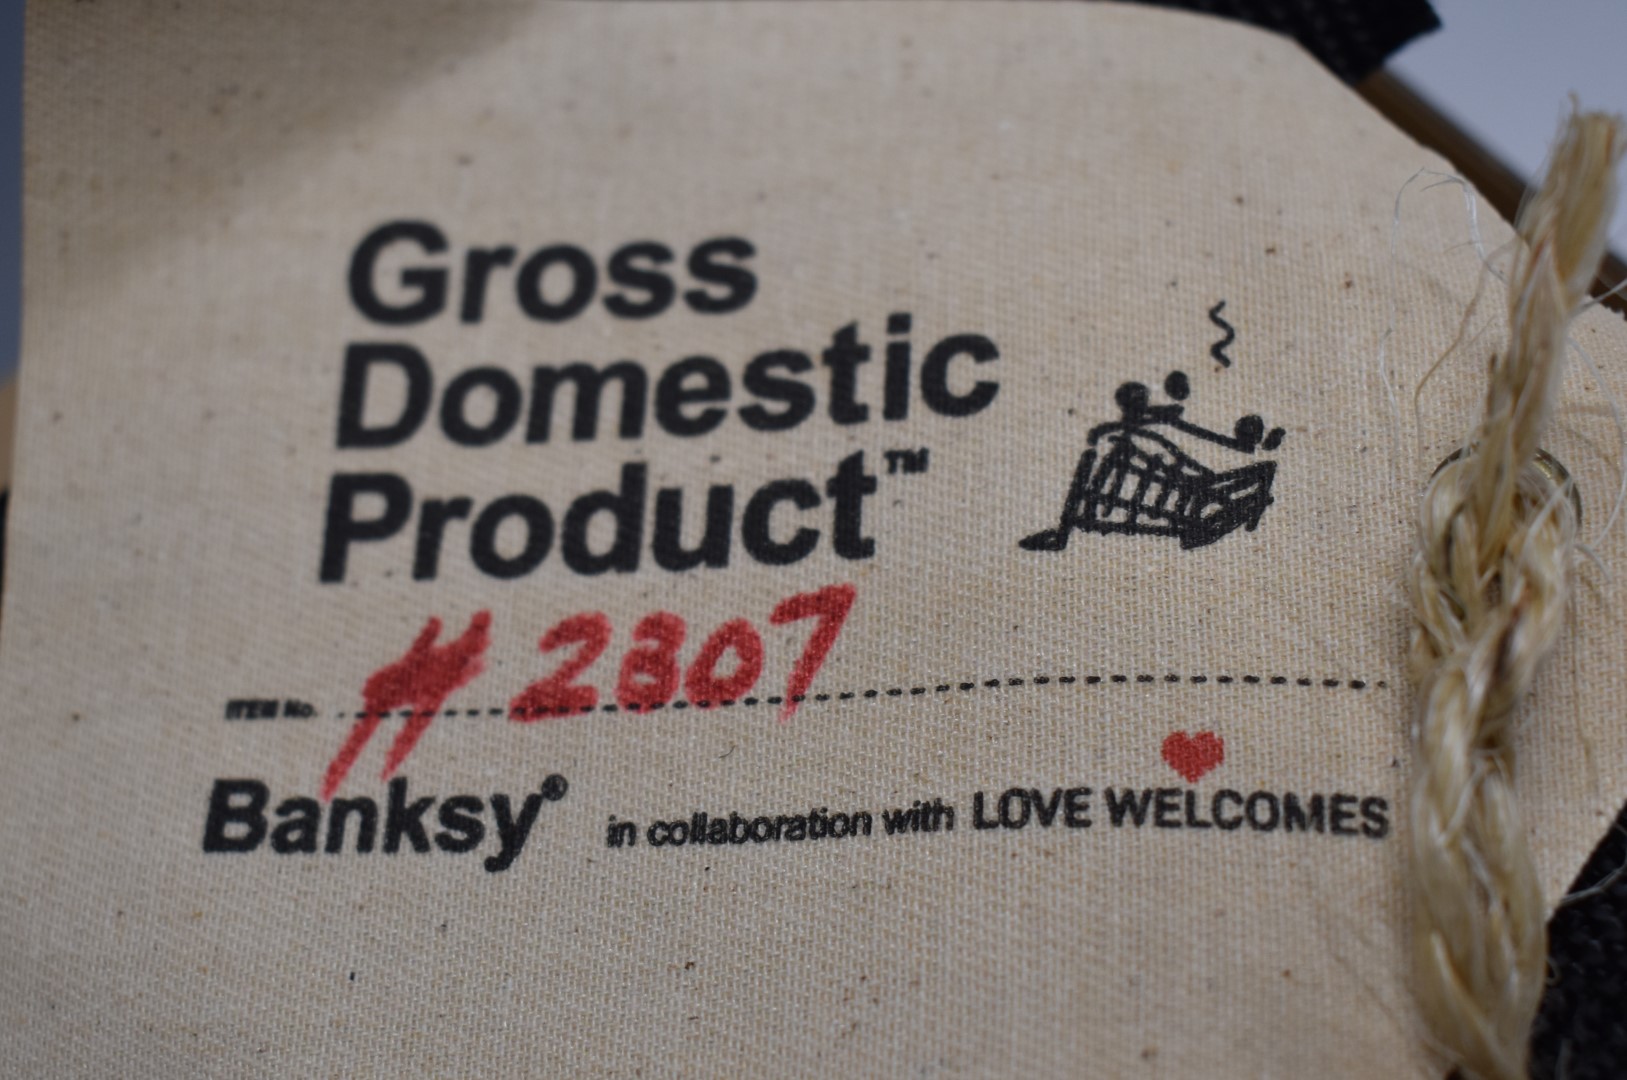 Banksy Welcome doormat, in original Love Welcomes box with Gross Domestic Product label, produced in - Image 3 of 3